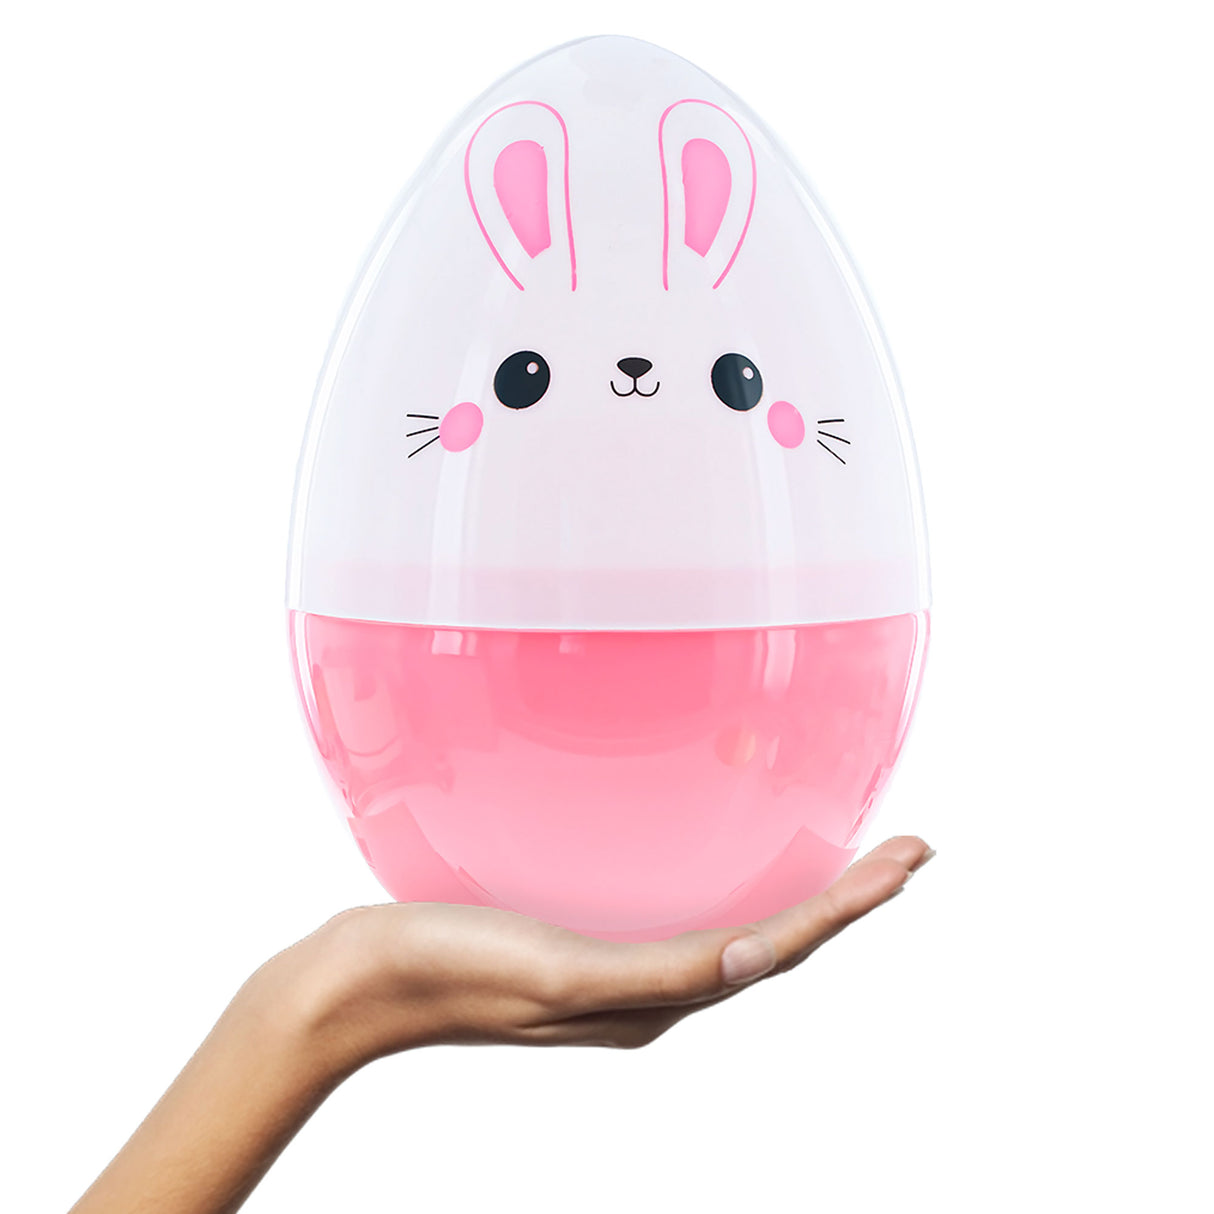 Large Bunny Giant Jumbo Size White and Pink Plastic Easter Egg 10 Inches in Multi color, Oval shape